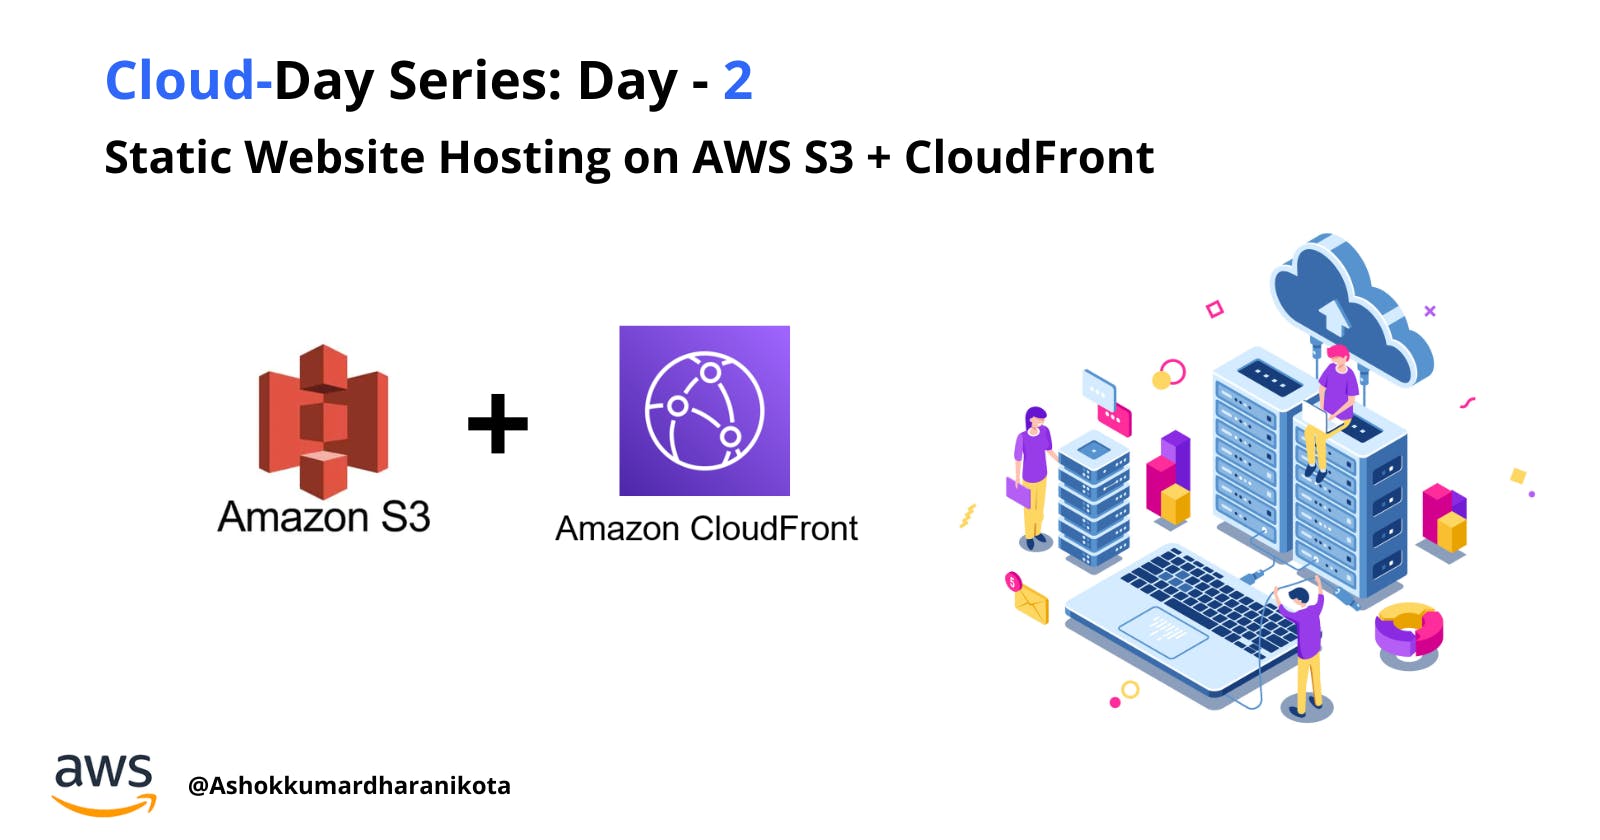 Static Website Hosting on AWS S3 + CloudFront